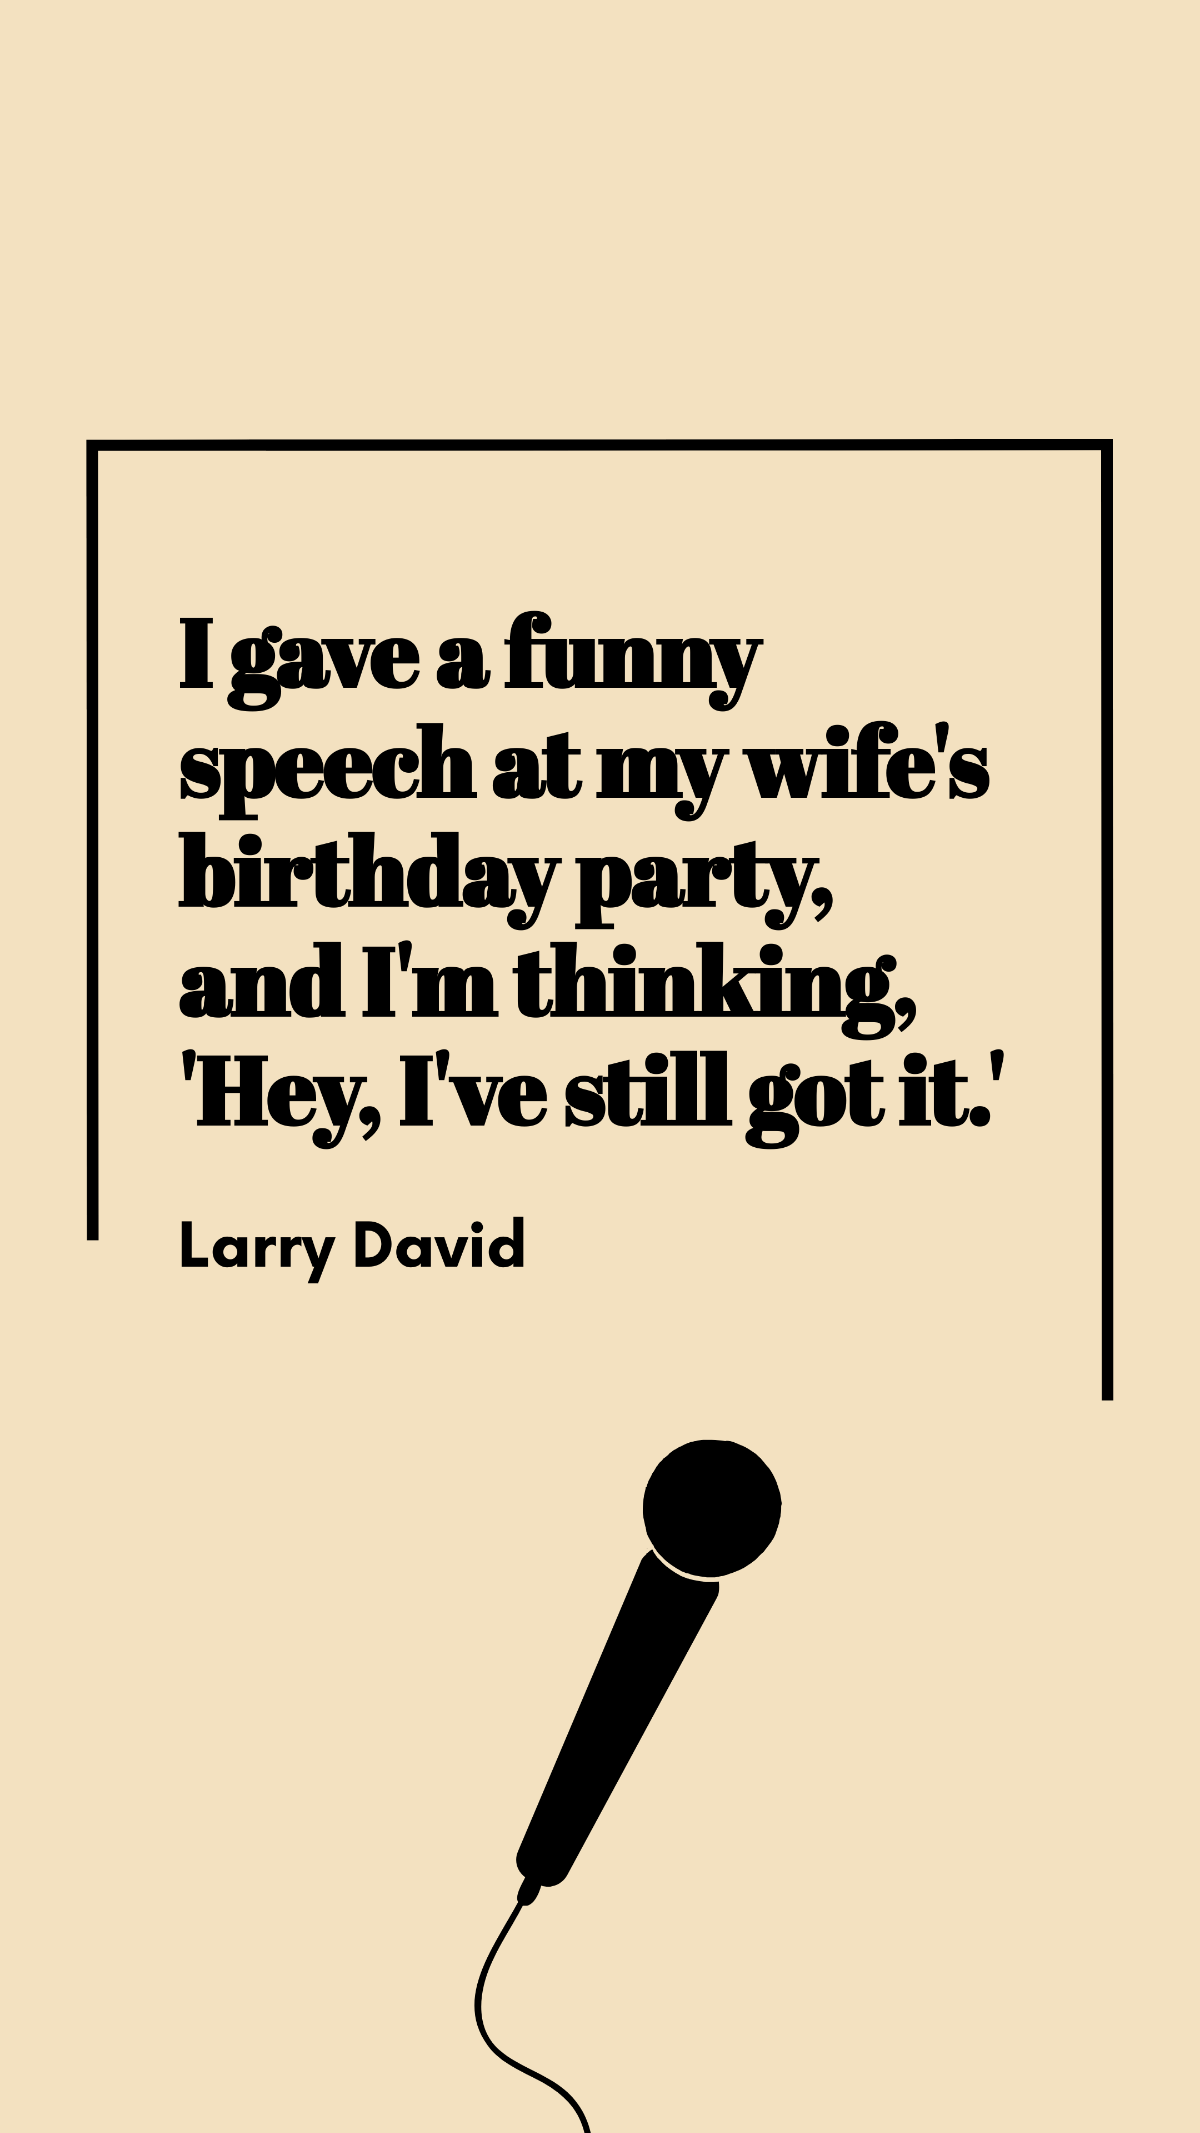 Larry David - I gave a funny speech at my wife's birthday party, and I'm thinking, 'Hey, I've still got it.' Template